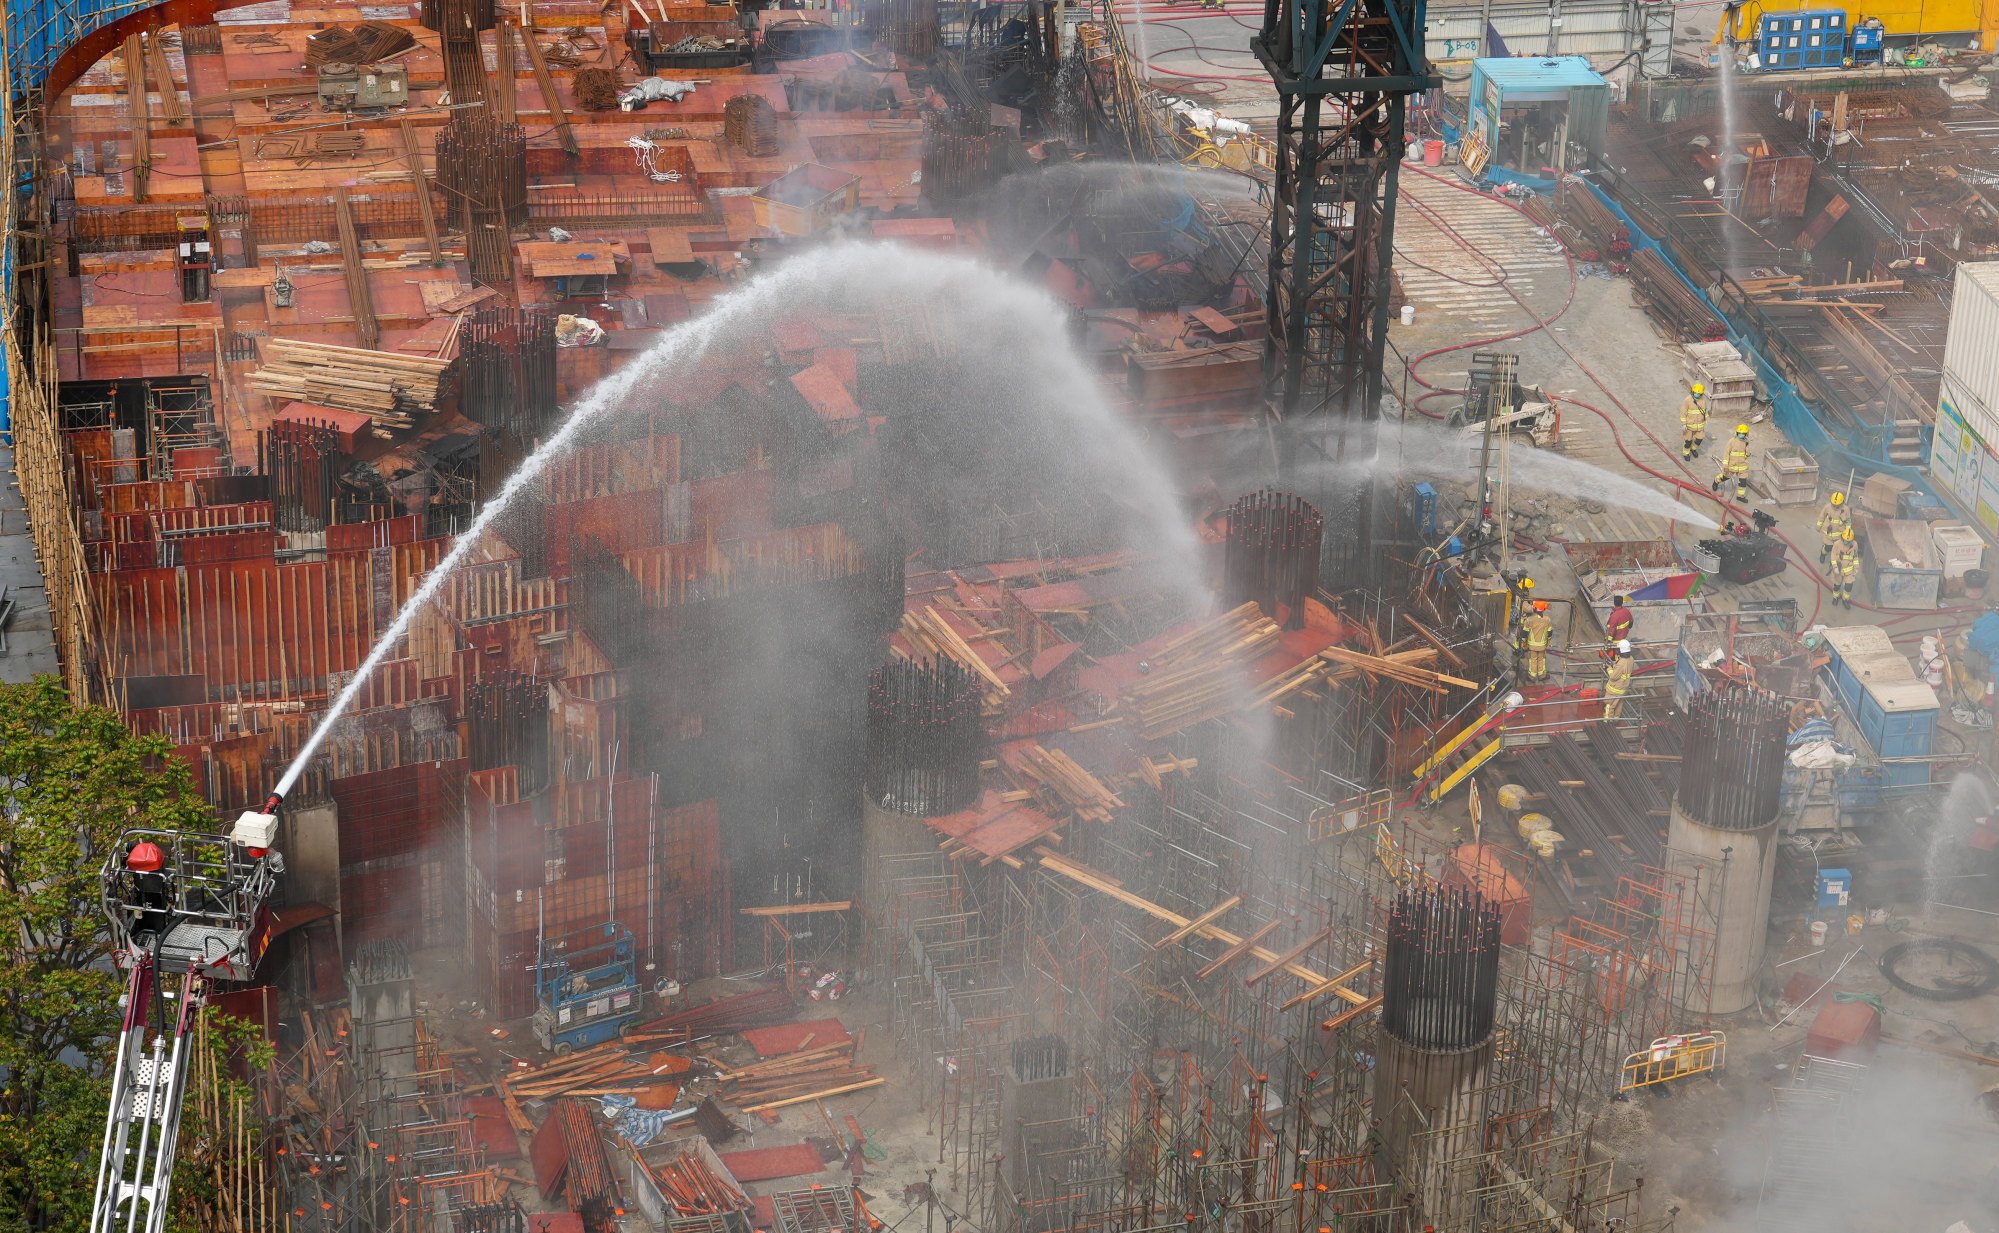 Firefighters battle the blaze at the construction site. Authorities said explosions occurred in the basement, possibly linked to oxyacetylene cylinders. Photo: May Tse